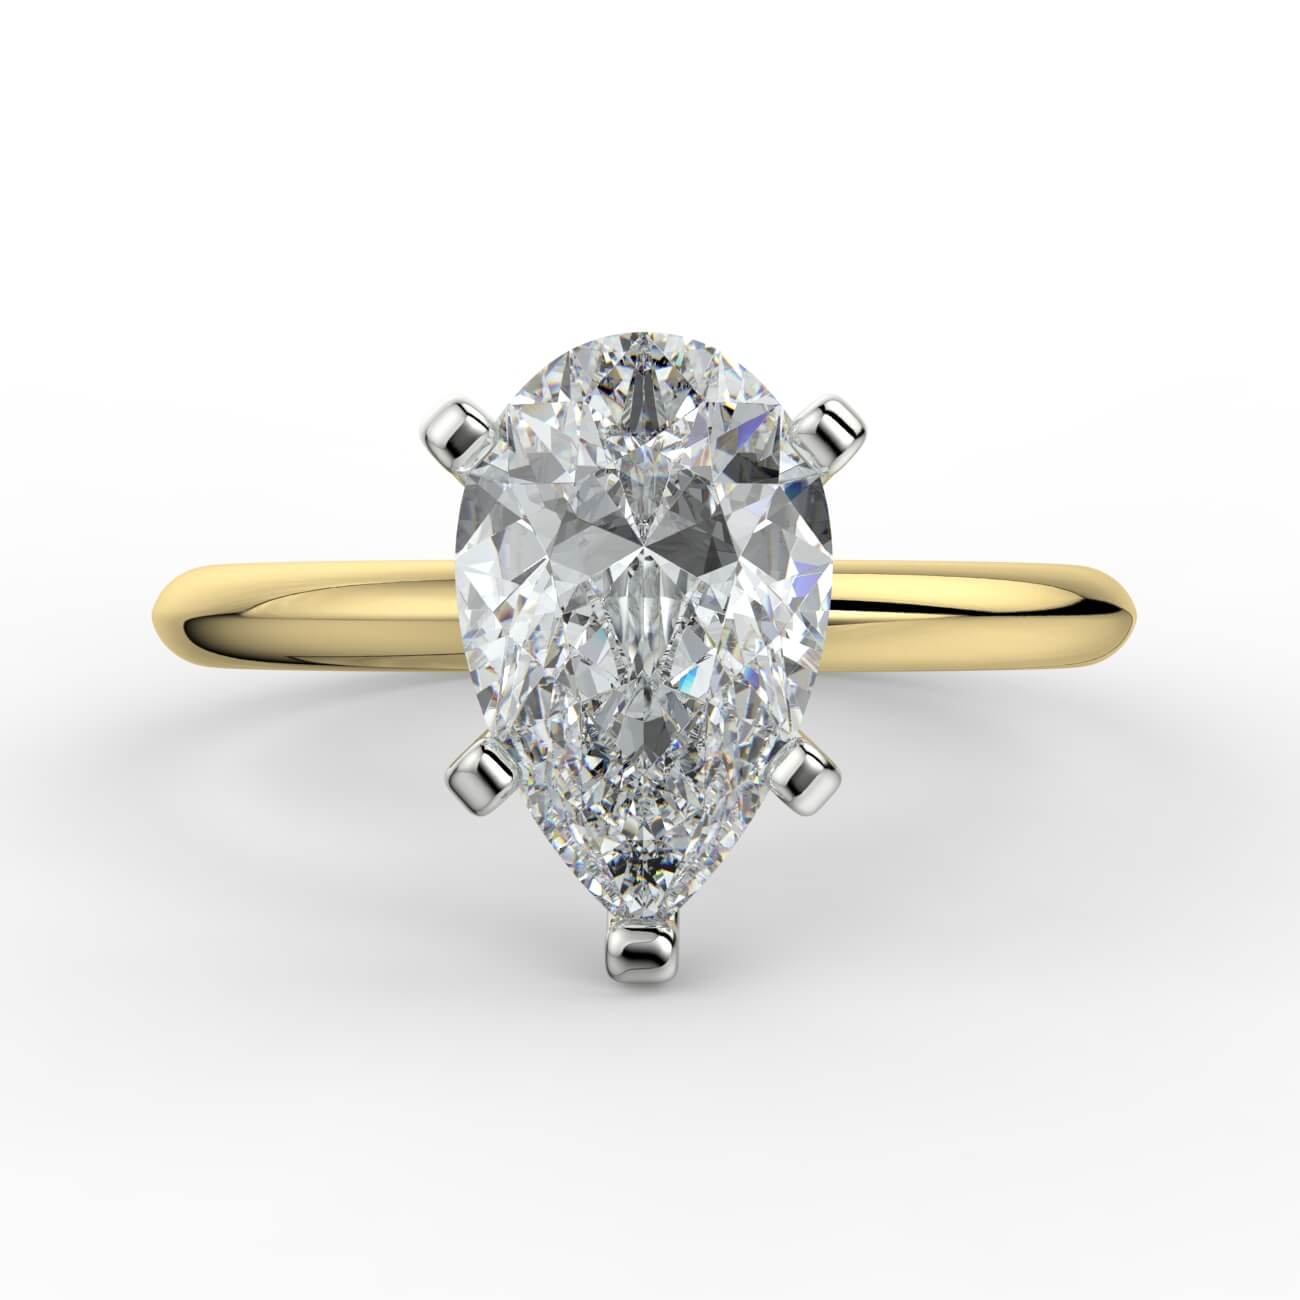 Knife-edge solitaire pear diamond engagement ring in yellow and white gold – Australian Diamond Network